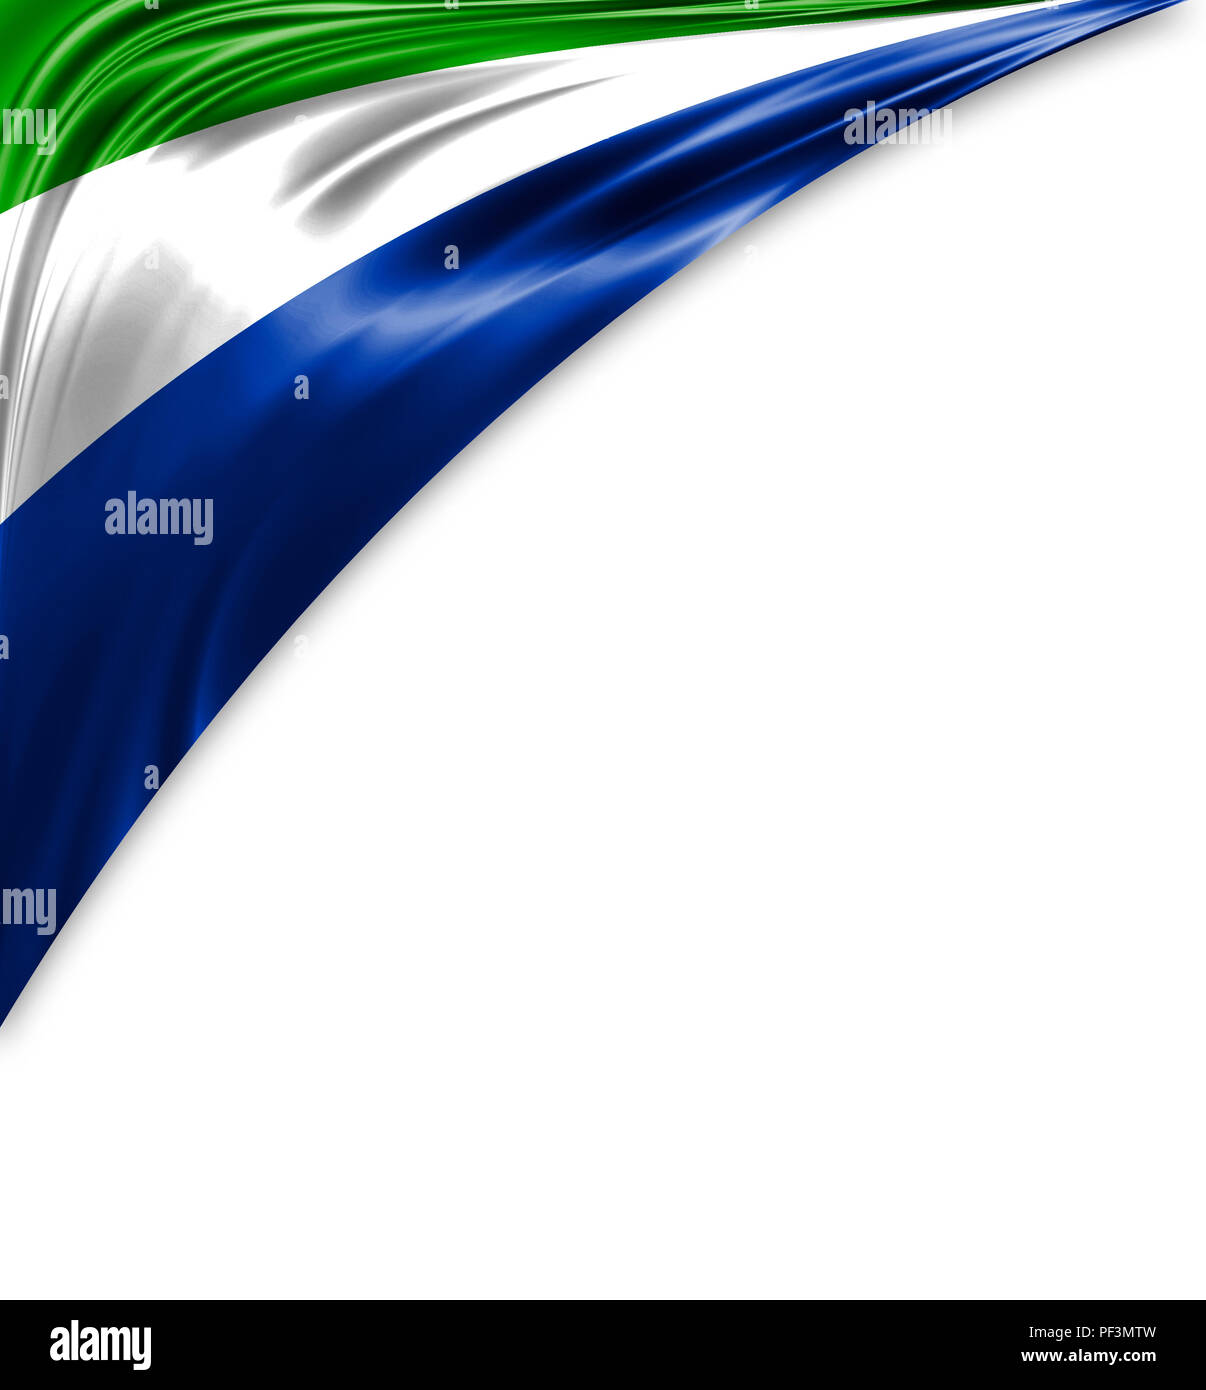 Sierra Leone flag of silk with copyspace for your text or images and white  background Stock Photo - Alamy